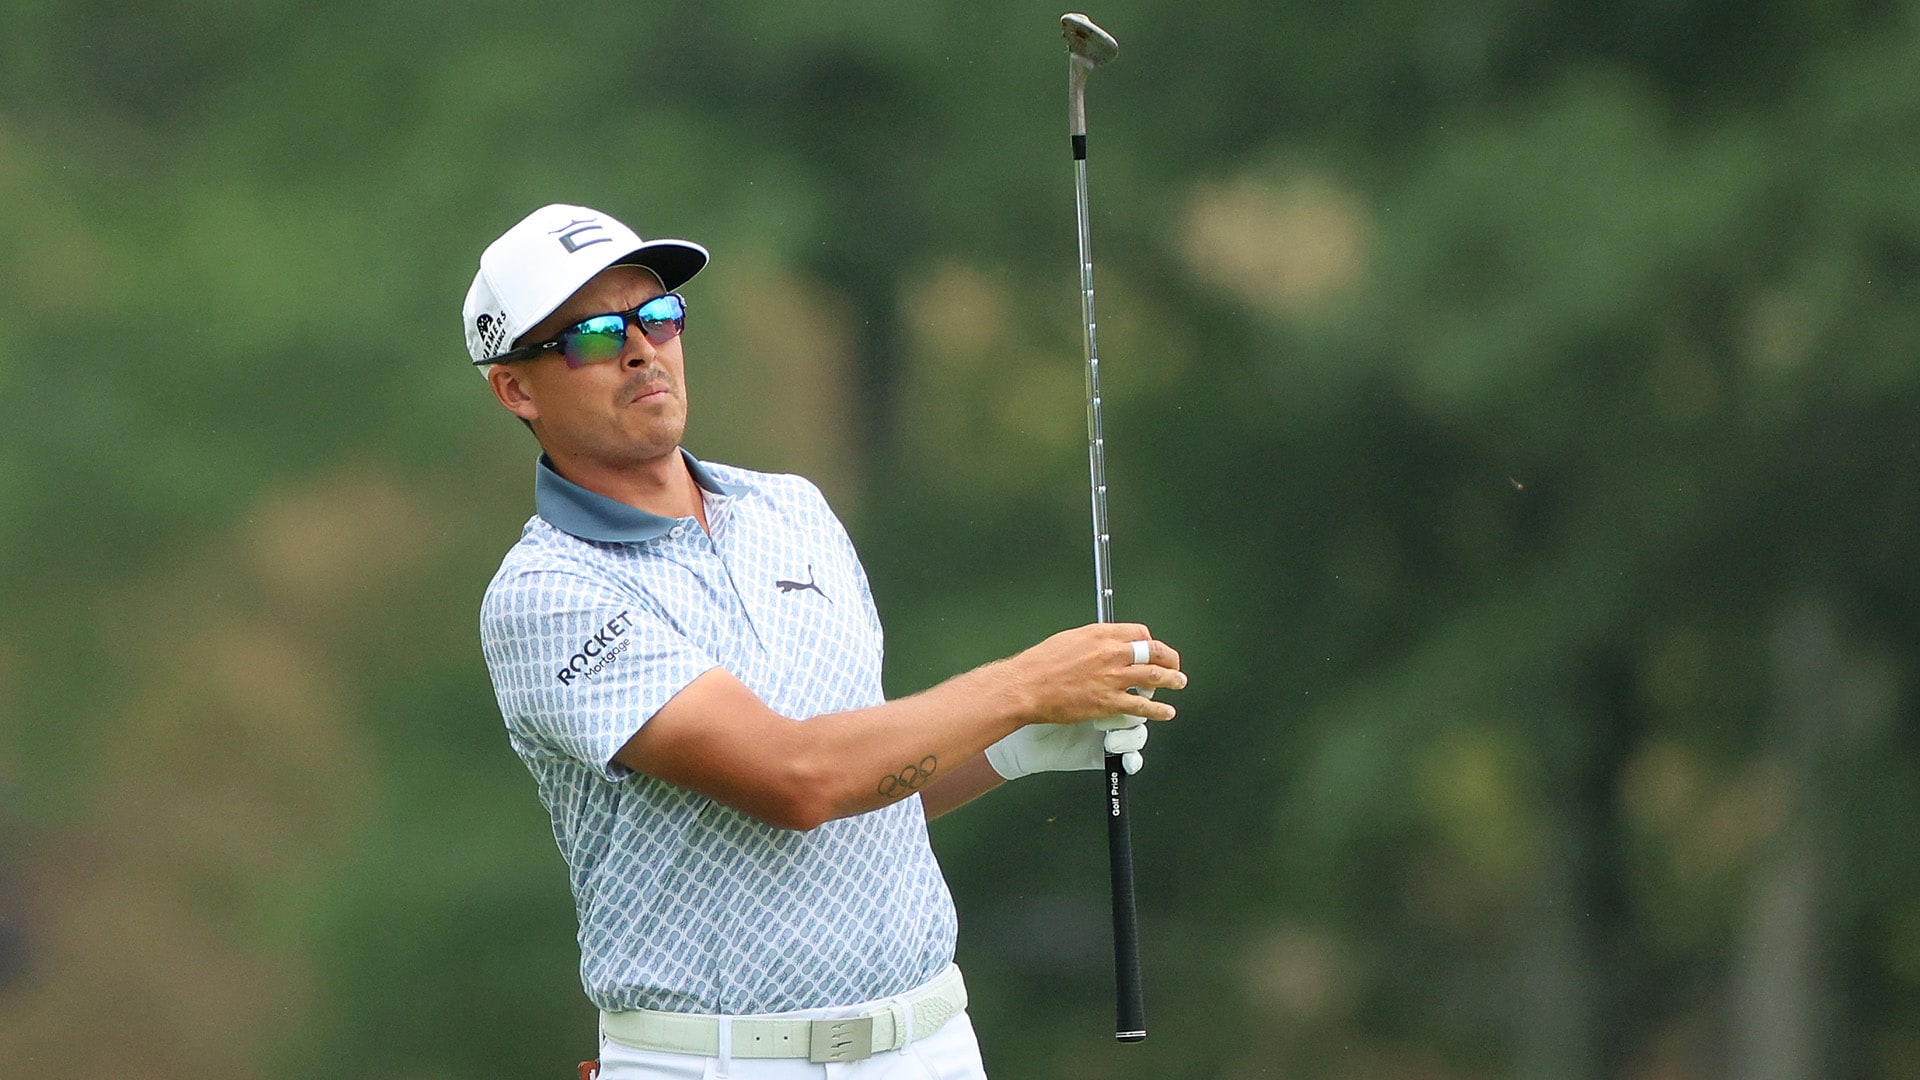 A week after a 62 at the U.S. Open, Rickie Fowler flirts with 59 at Travelers